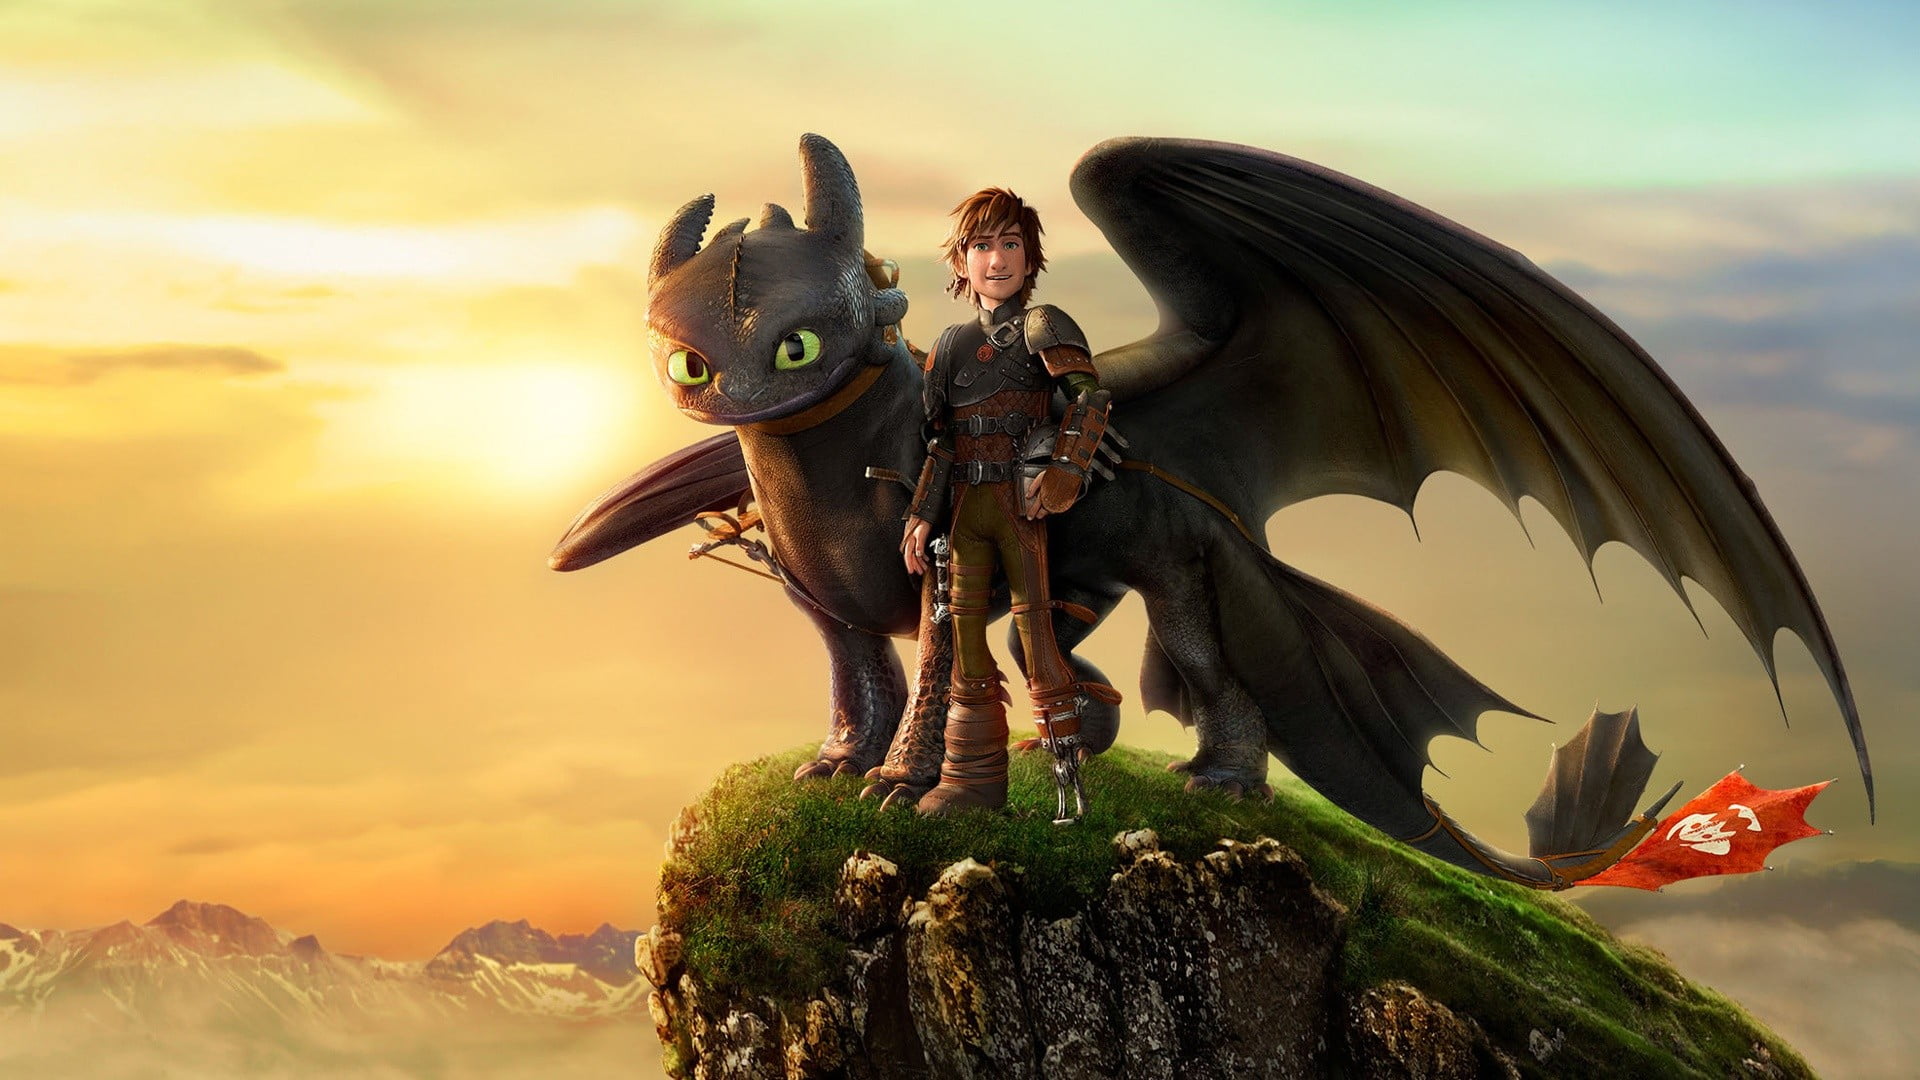 Disney How to Train Your Dragon wallpaper, How to Train Your Dragon 2